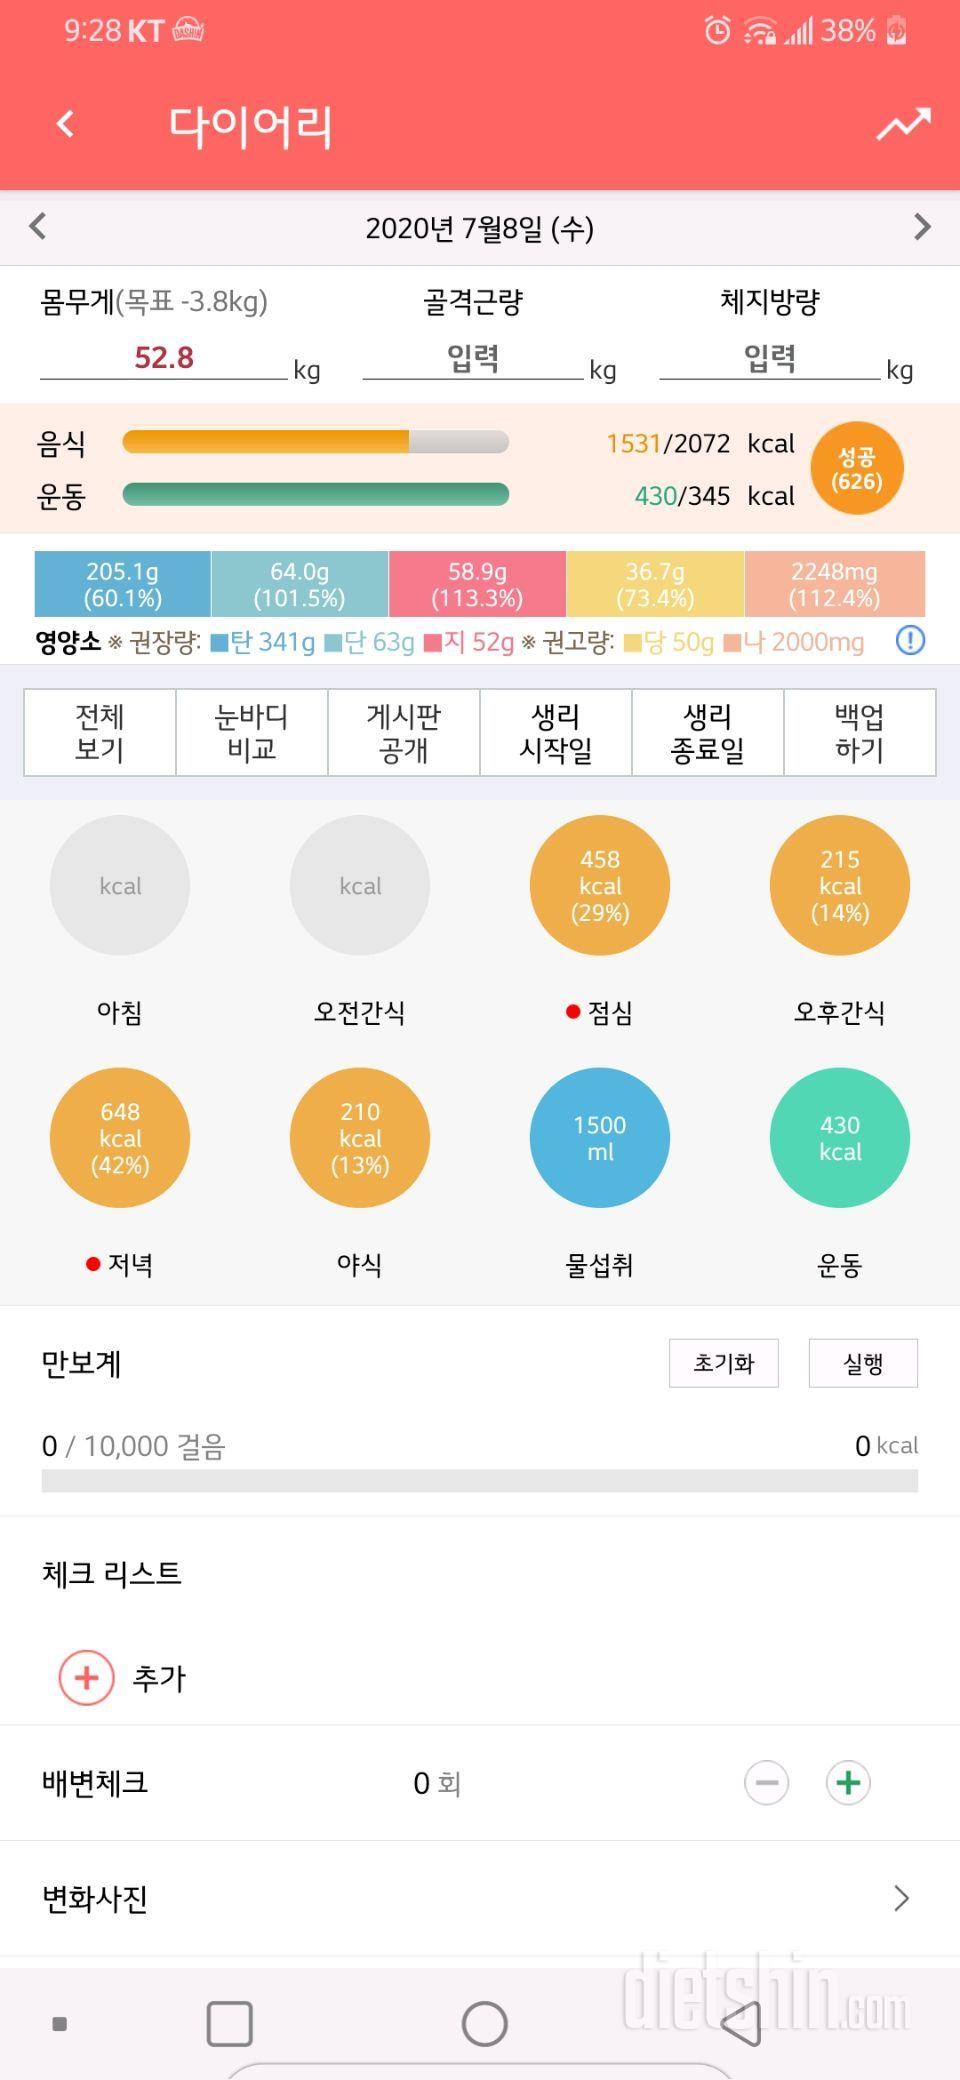 7월 8일 수욜?